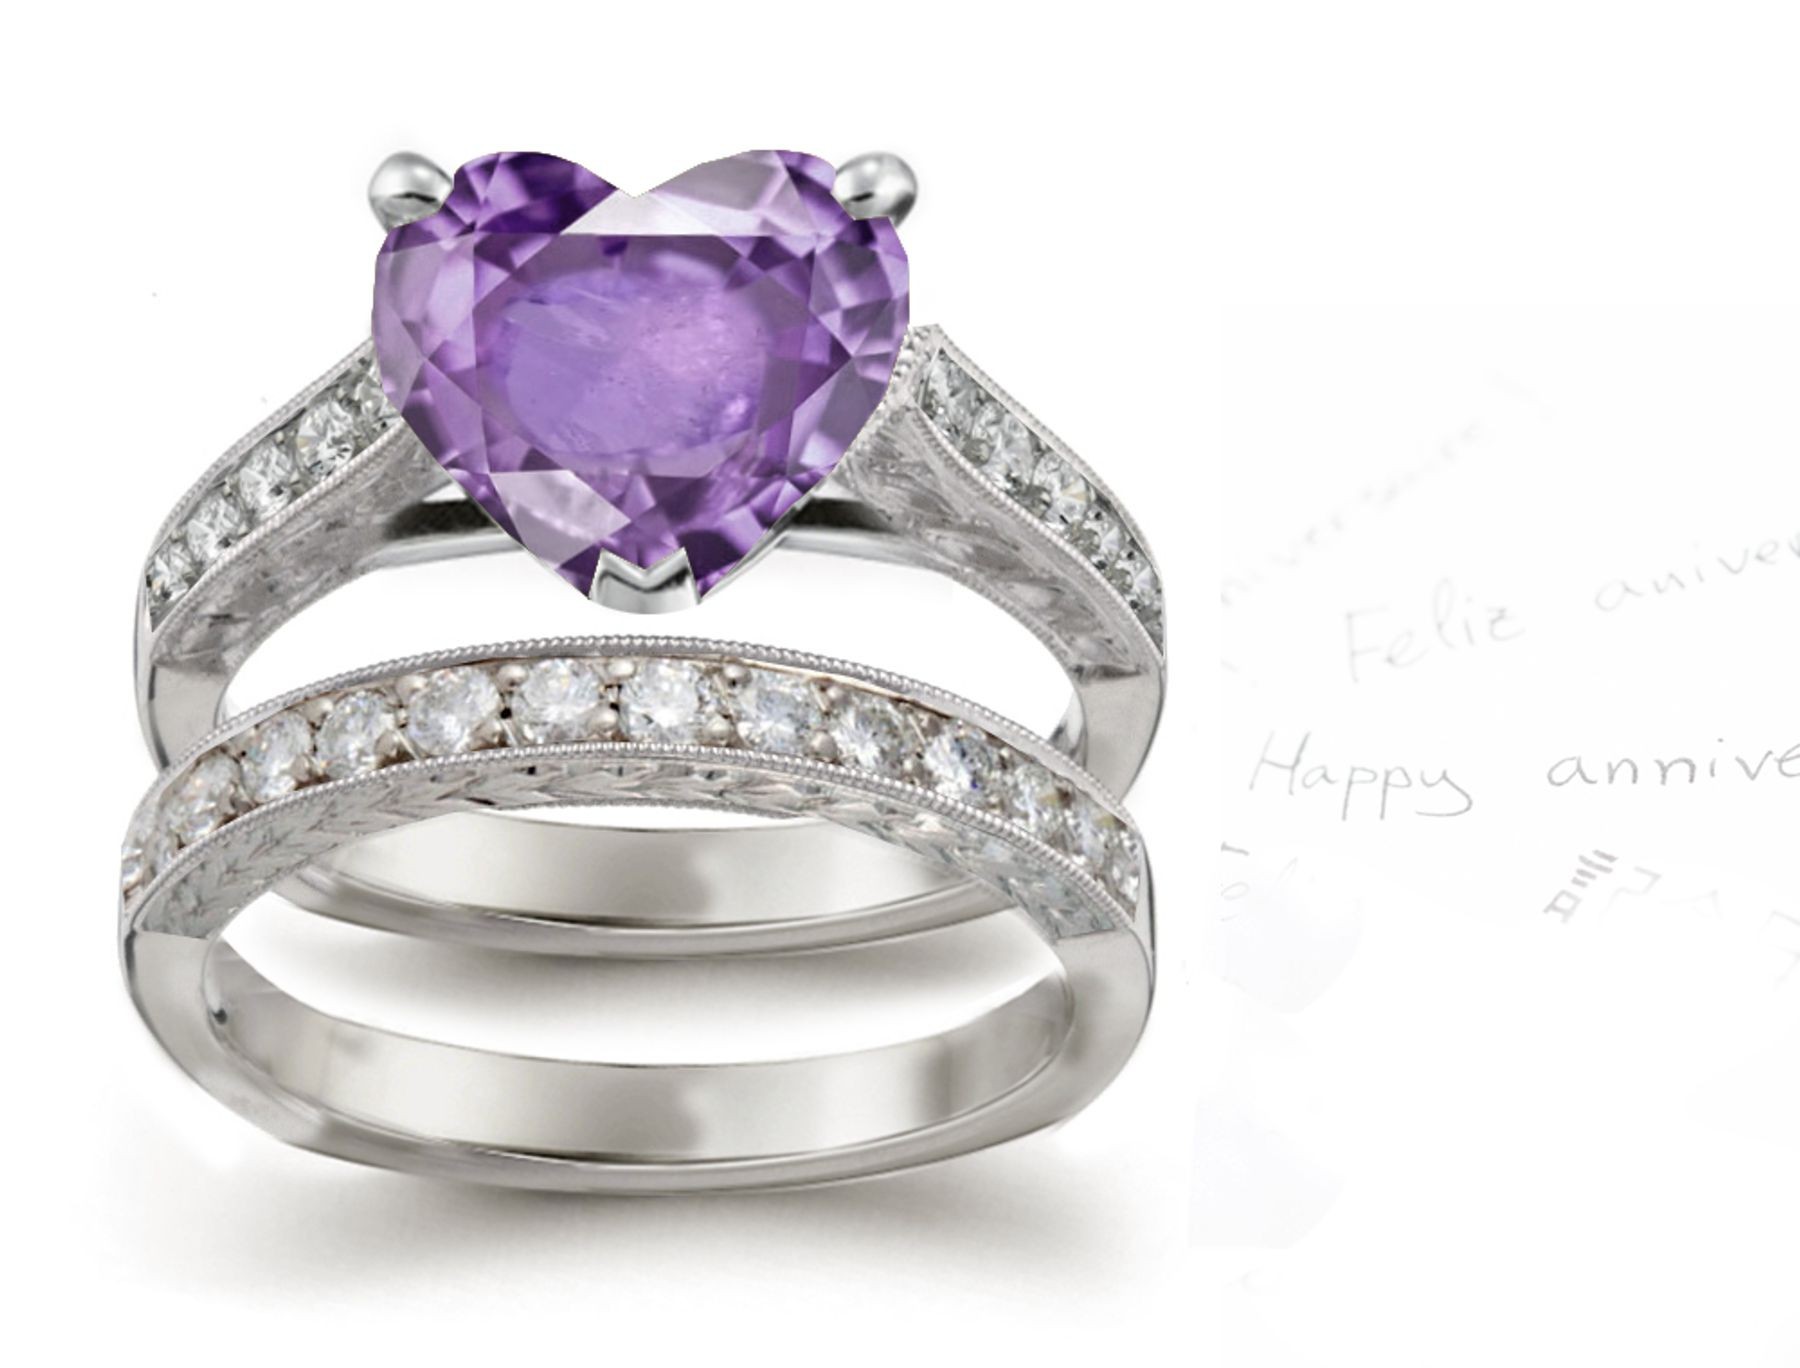 Women's Pink Sapphire Ring With Diamonds